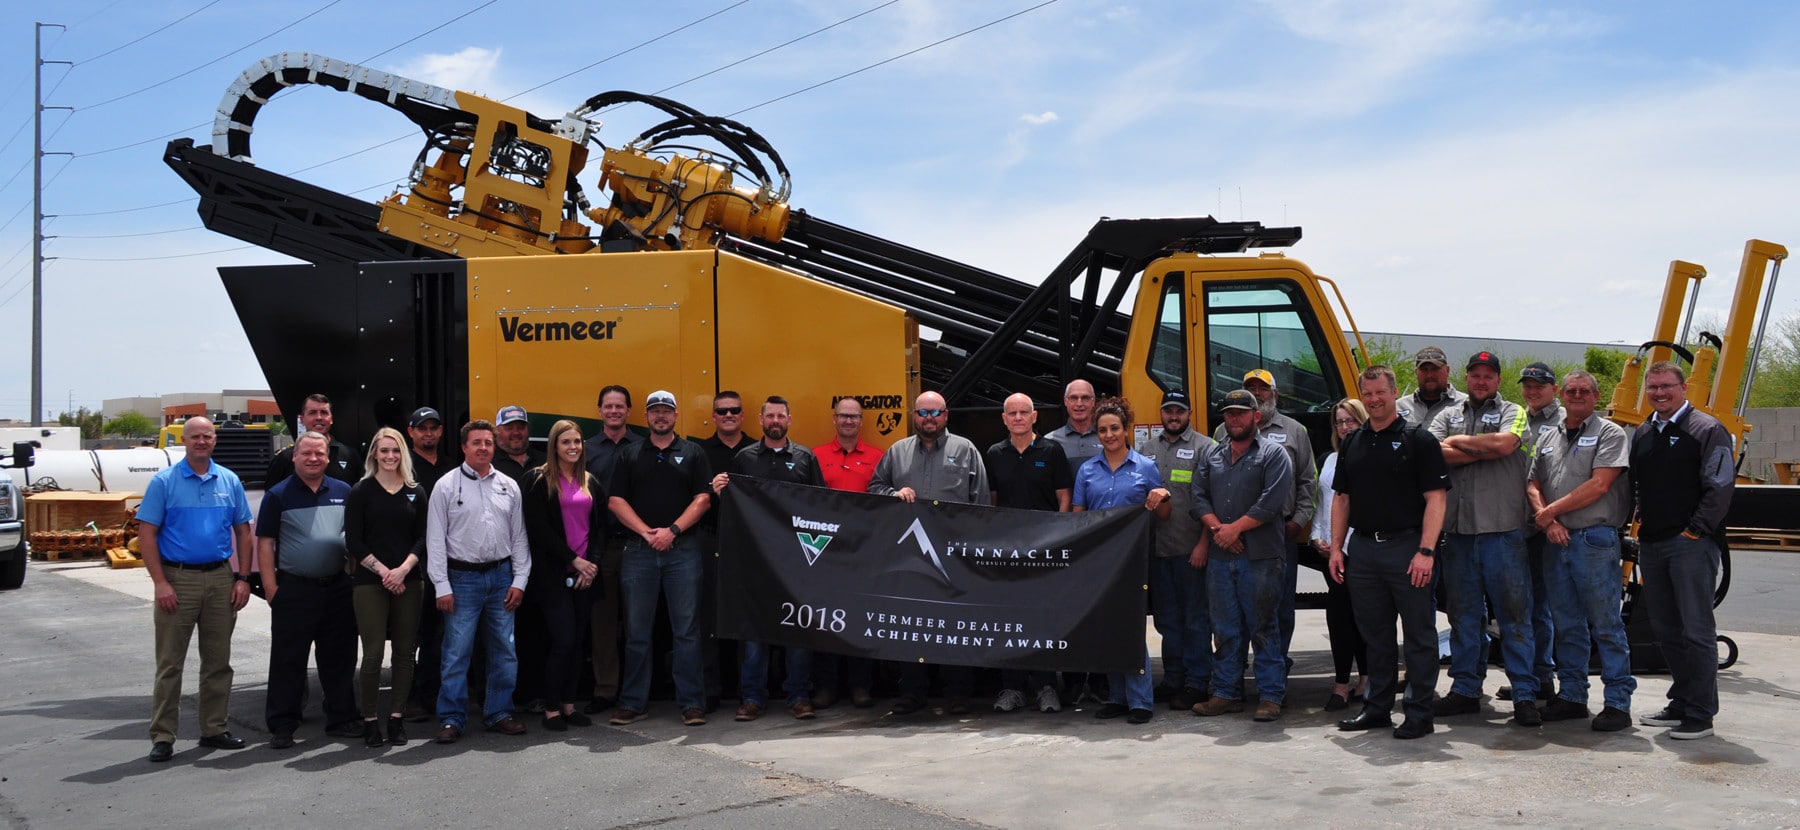 Iconic Brand Vermeer Southwest Makes Game-Changing Move Toward Productivity